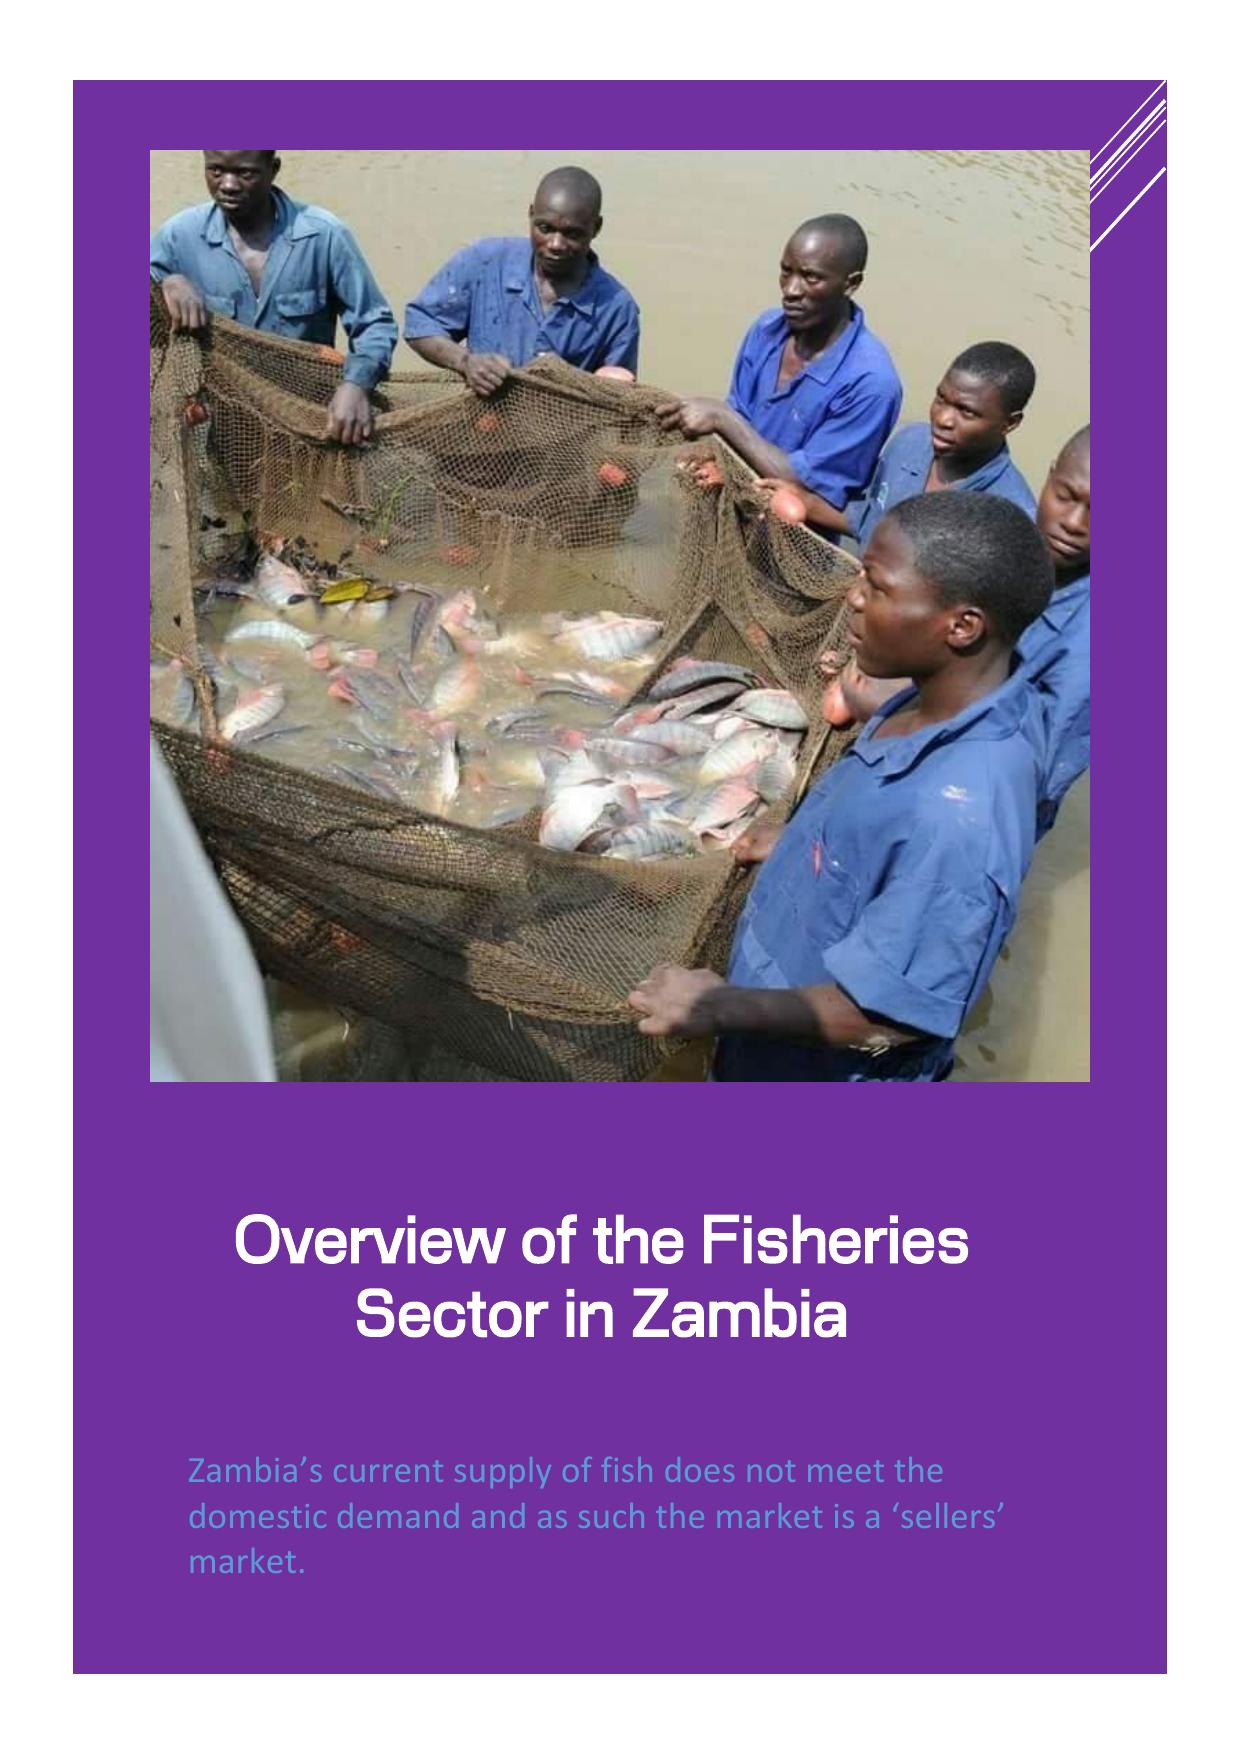 Overview of the Fisheries Sector in Zambia